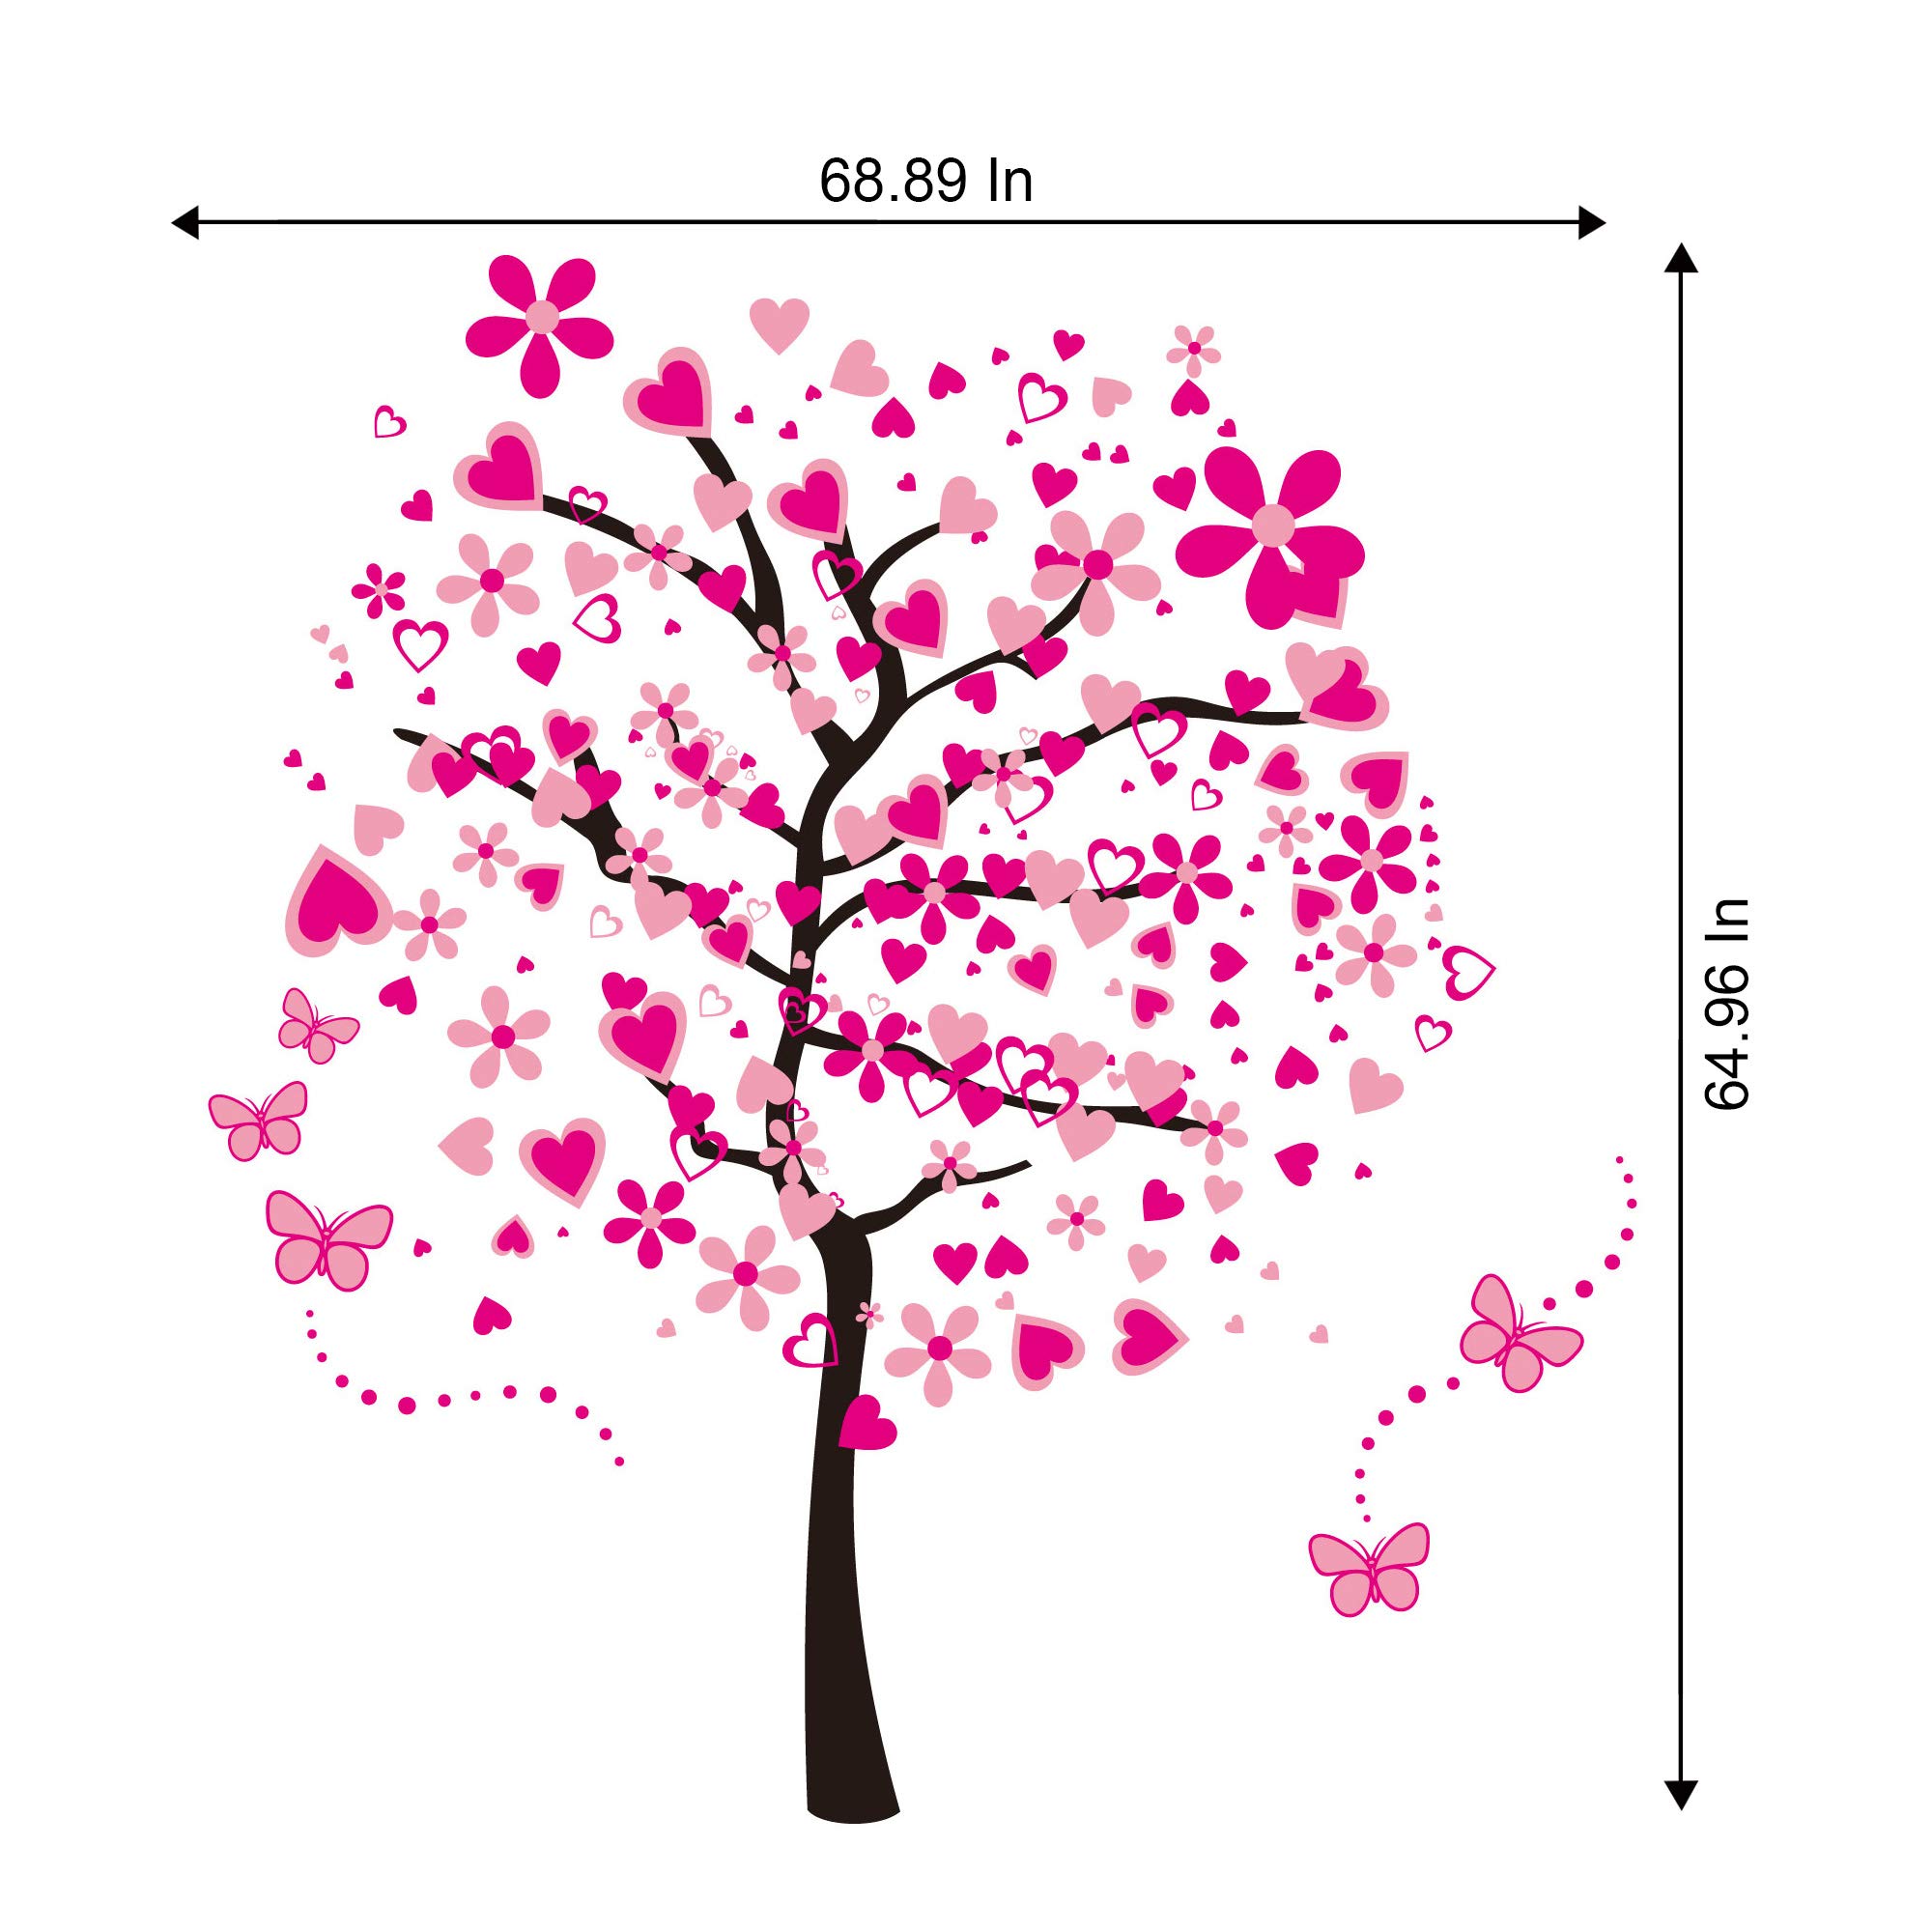 RW-1306 Creative Pink Flowers Tree Wall Decals Peach Blossom Love Heart Wall Stickers DIY Removable Cherry Floral Butterfly Dot Wall Decor for Girls Women Bedroom Living Room Nursery Office Decoration